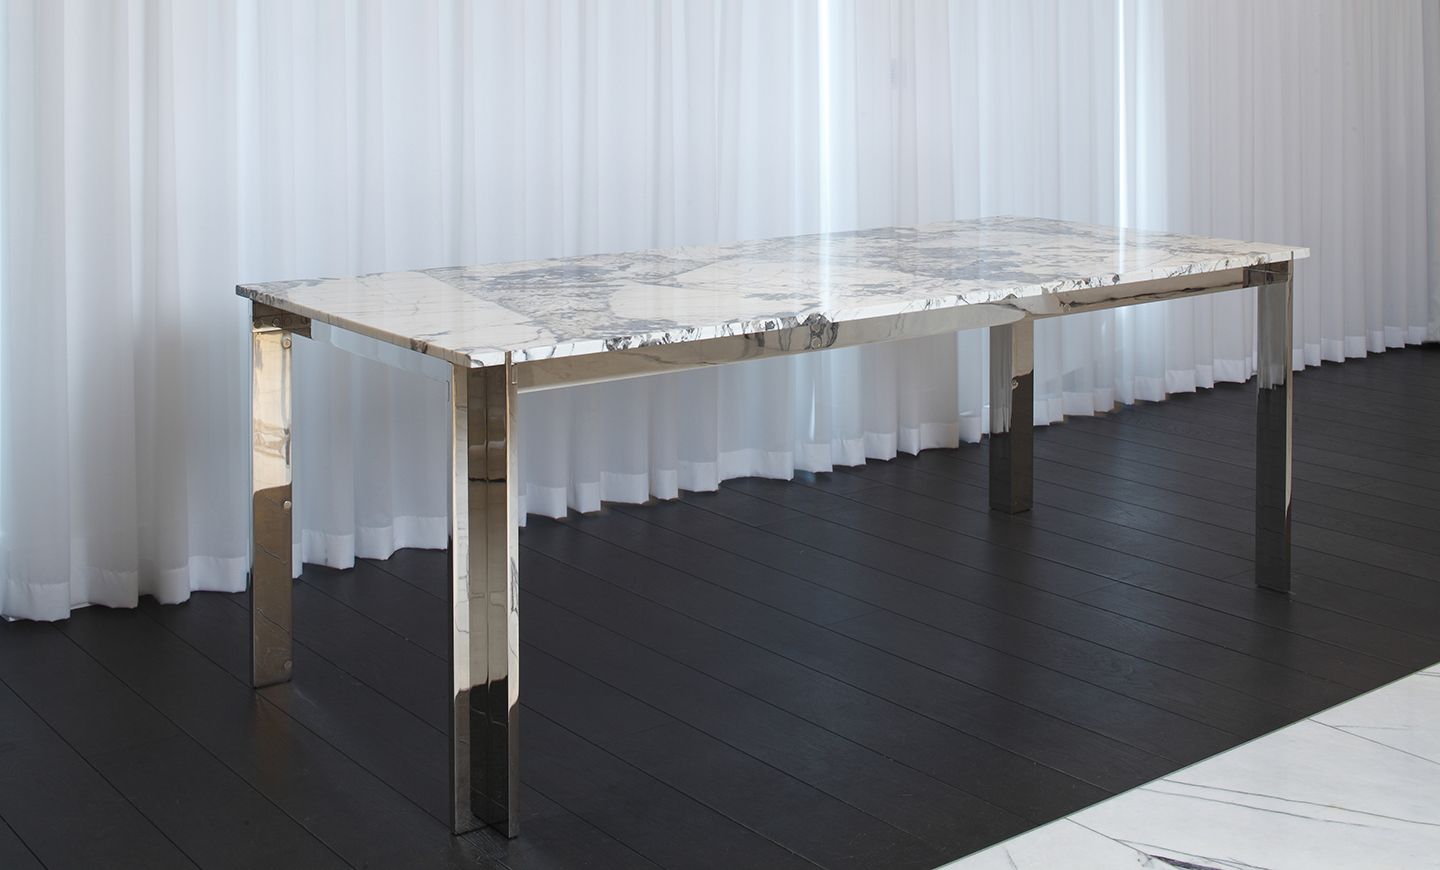 A Carlo Dining Table installed at The Mandrake Hotel